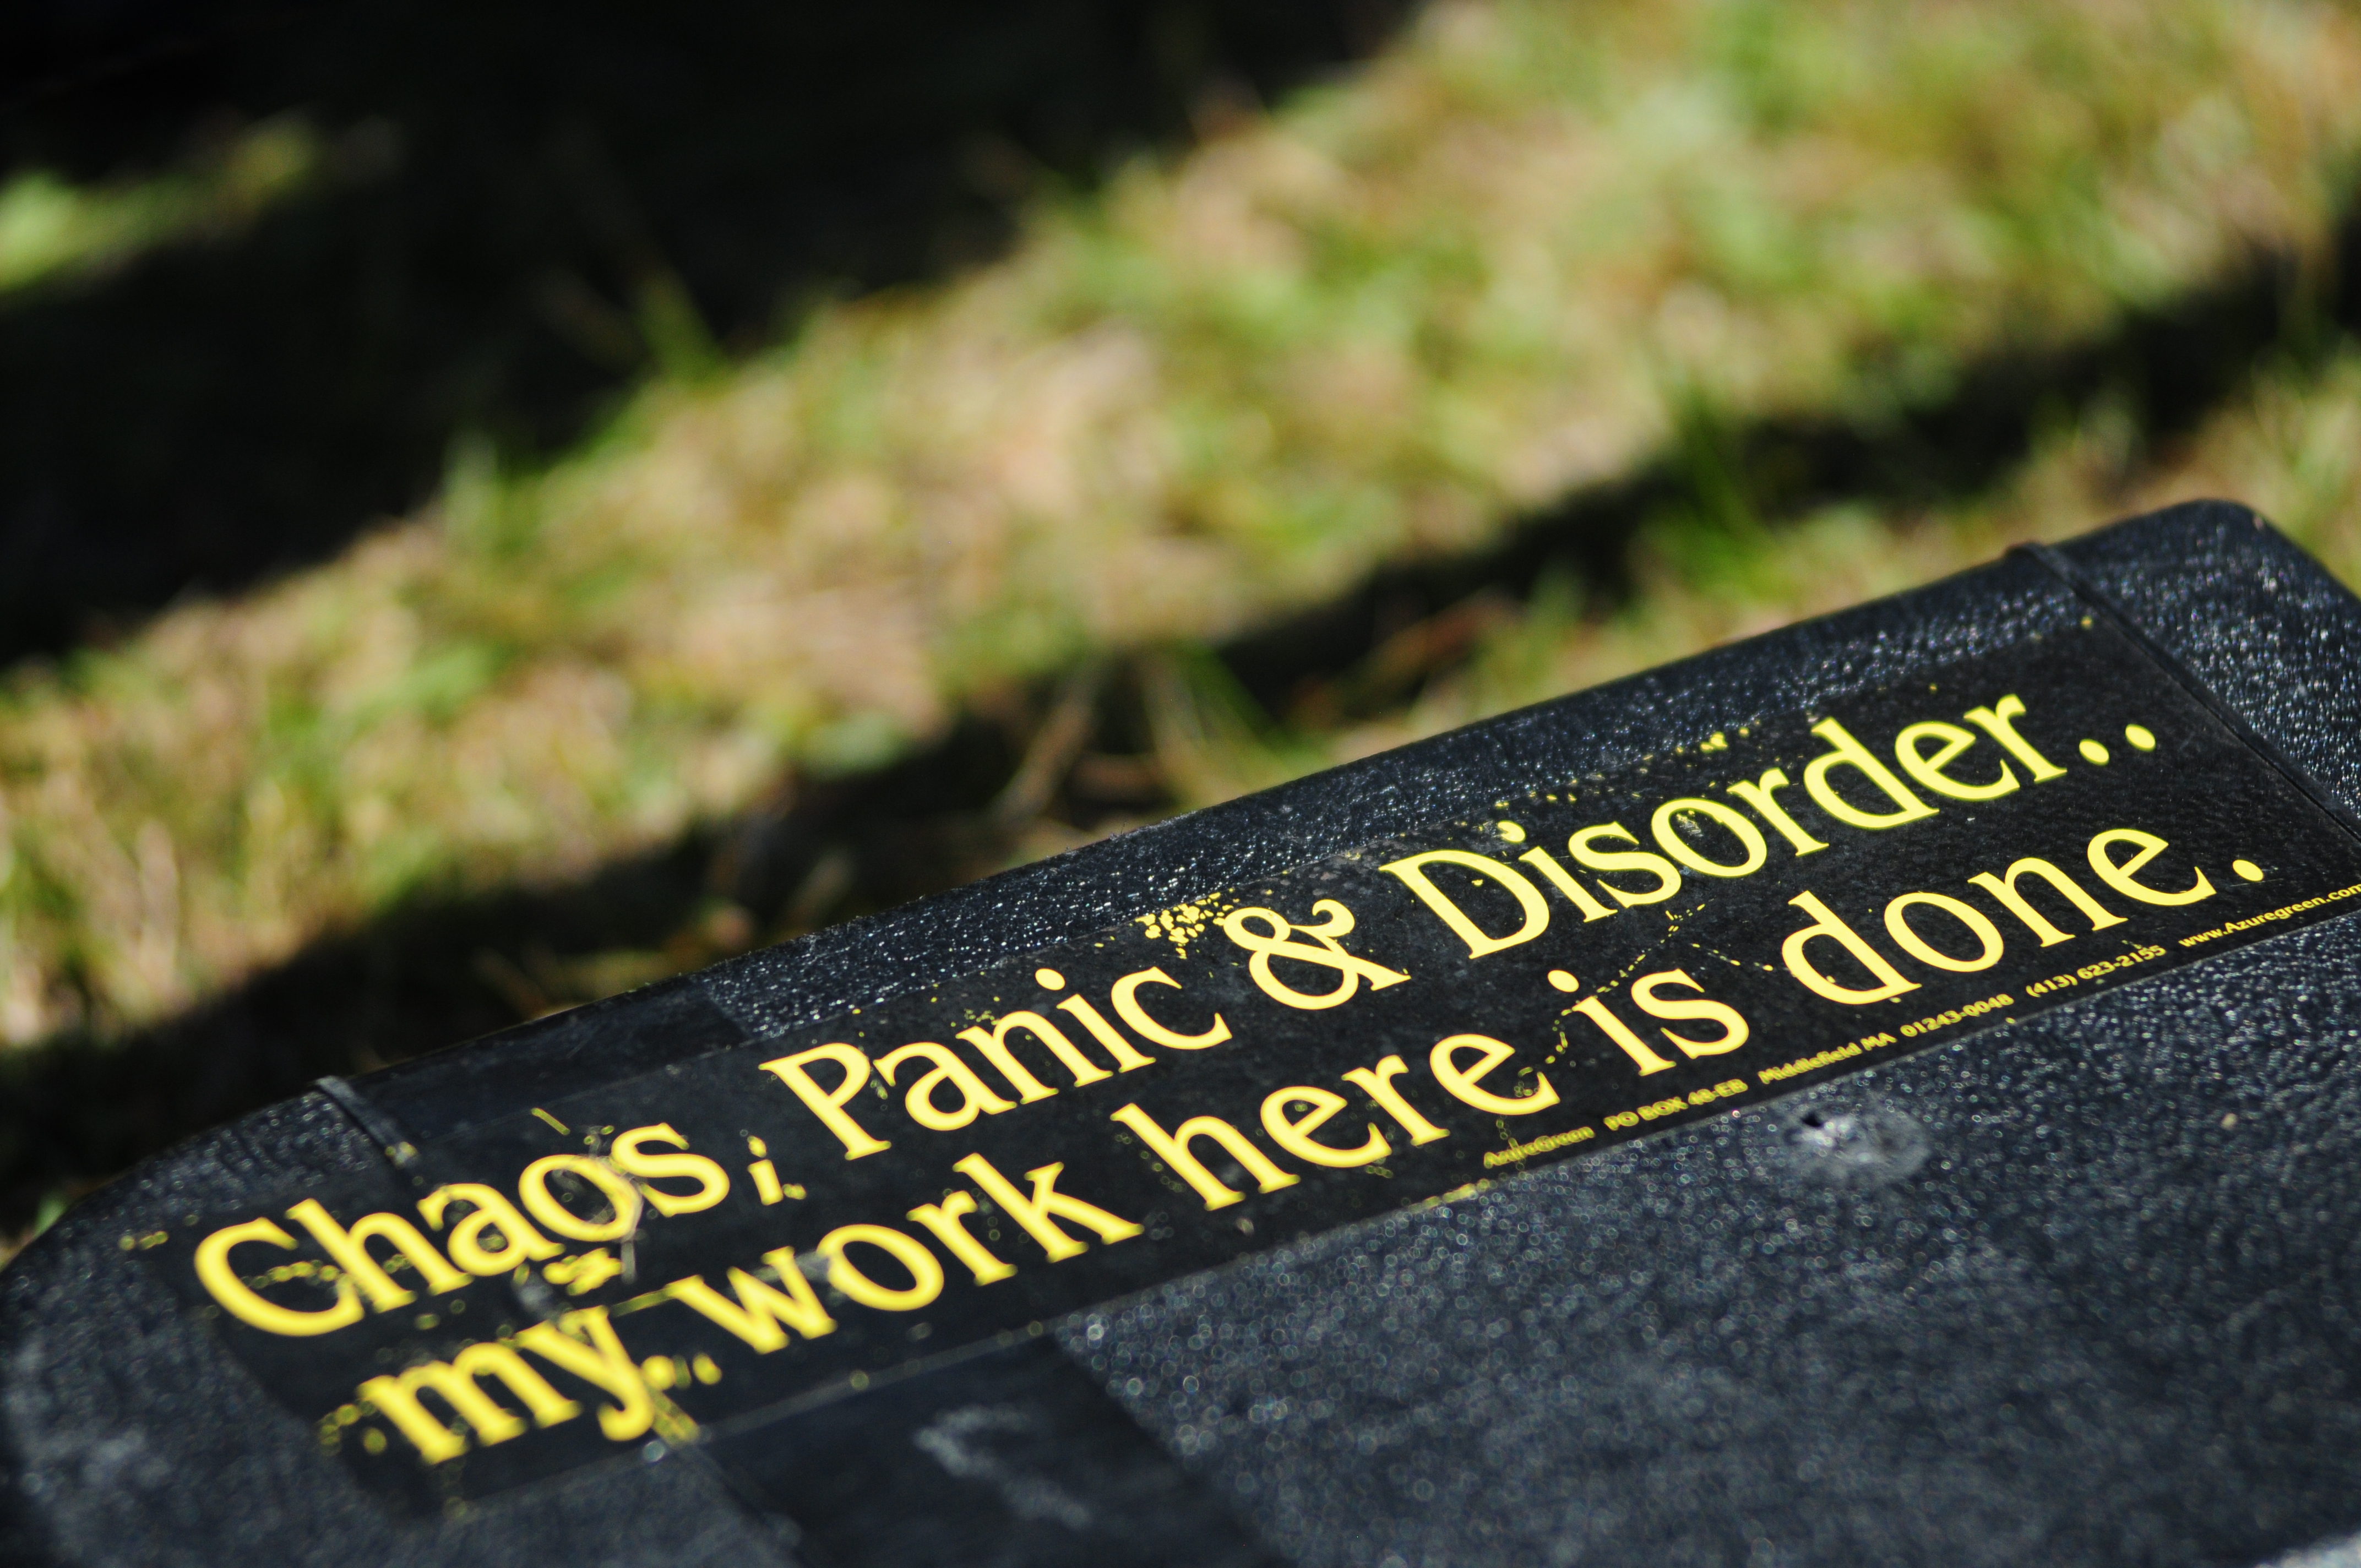 Chaos, Panic and Disorder - my work here is done